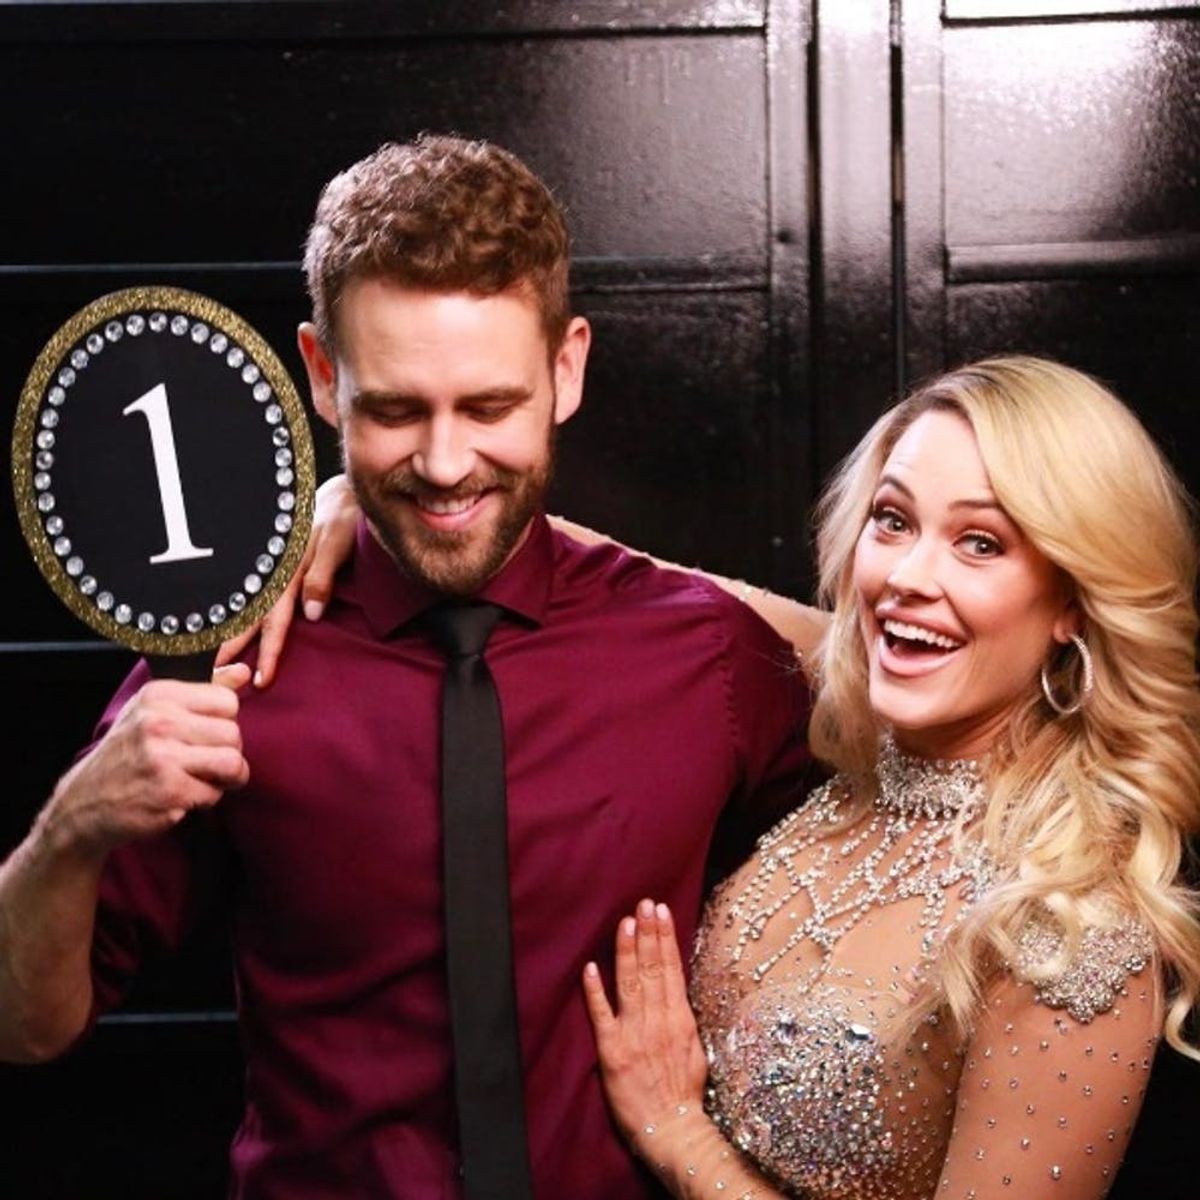 The Bachelor and DWTS Worlds Have Collided in the Most Romantic Way